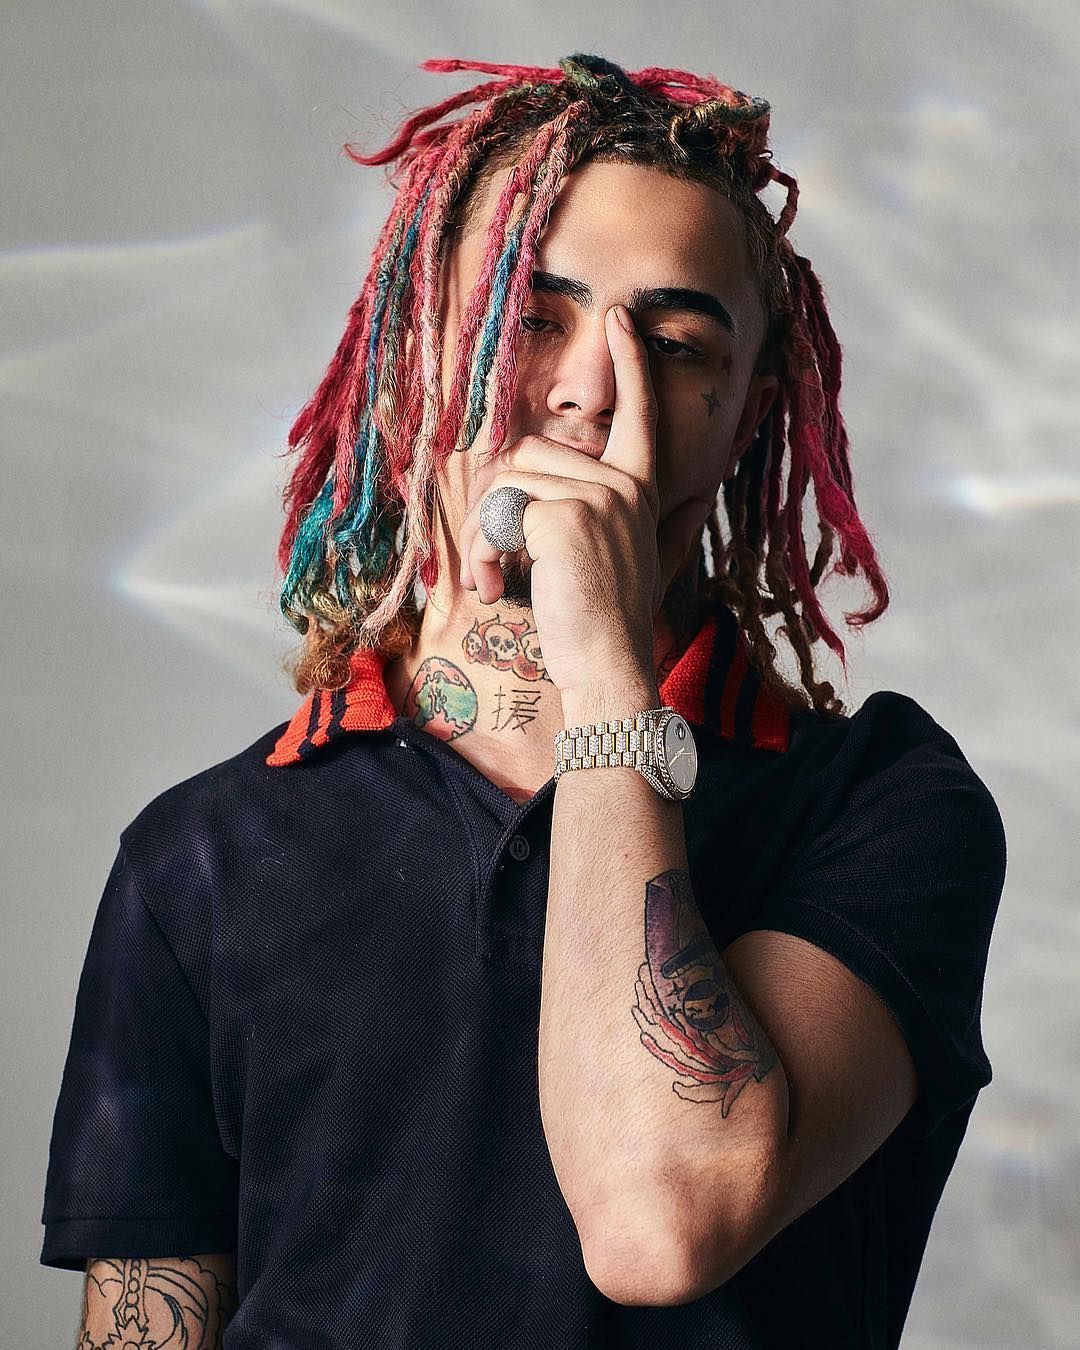 Download 10 Best Lil Pump Wallpapers HD Wallpapers 1080x1350